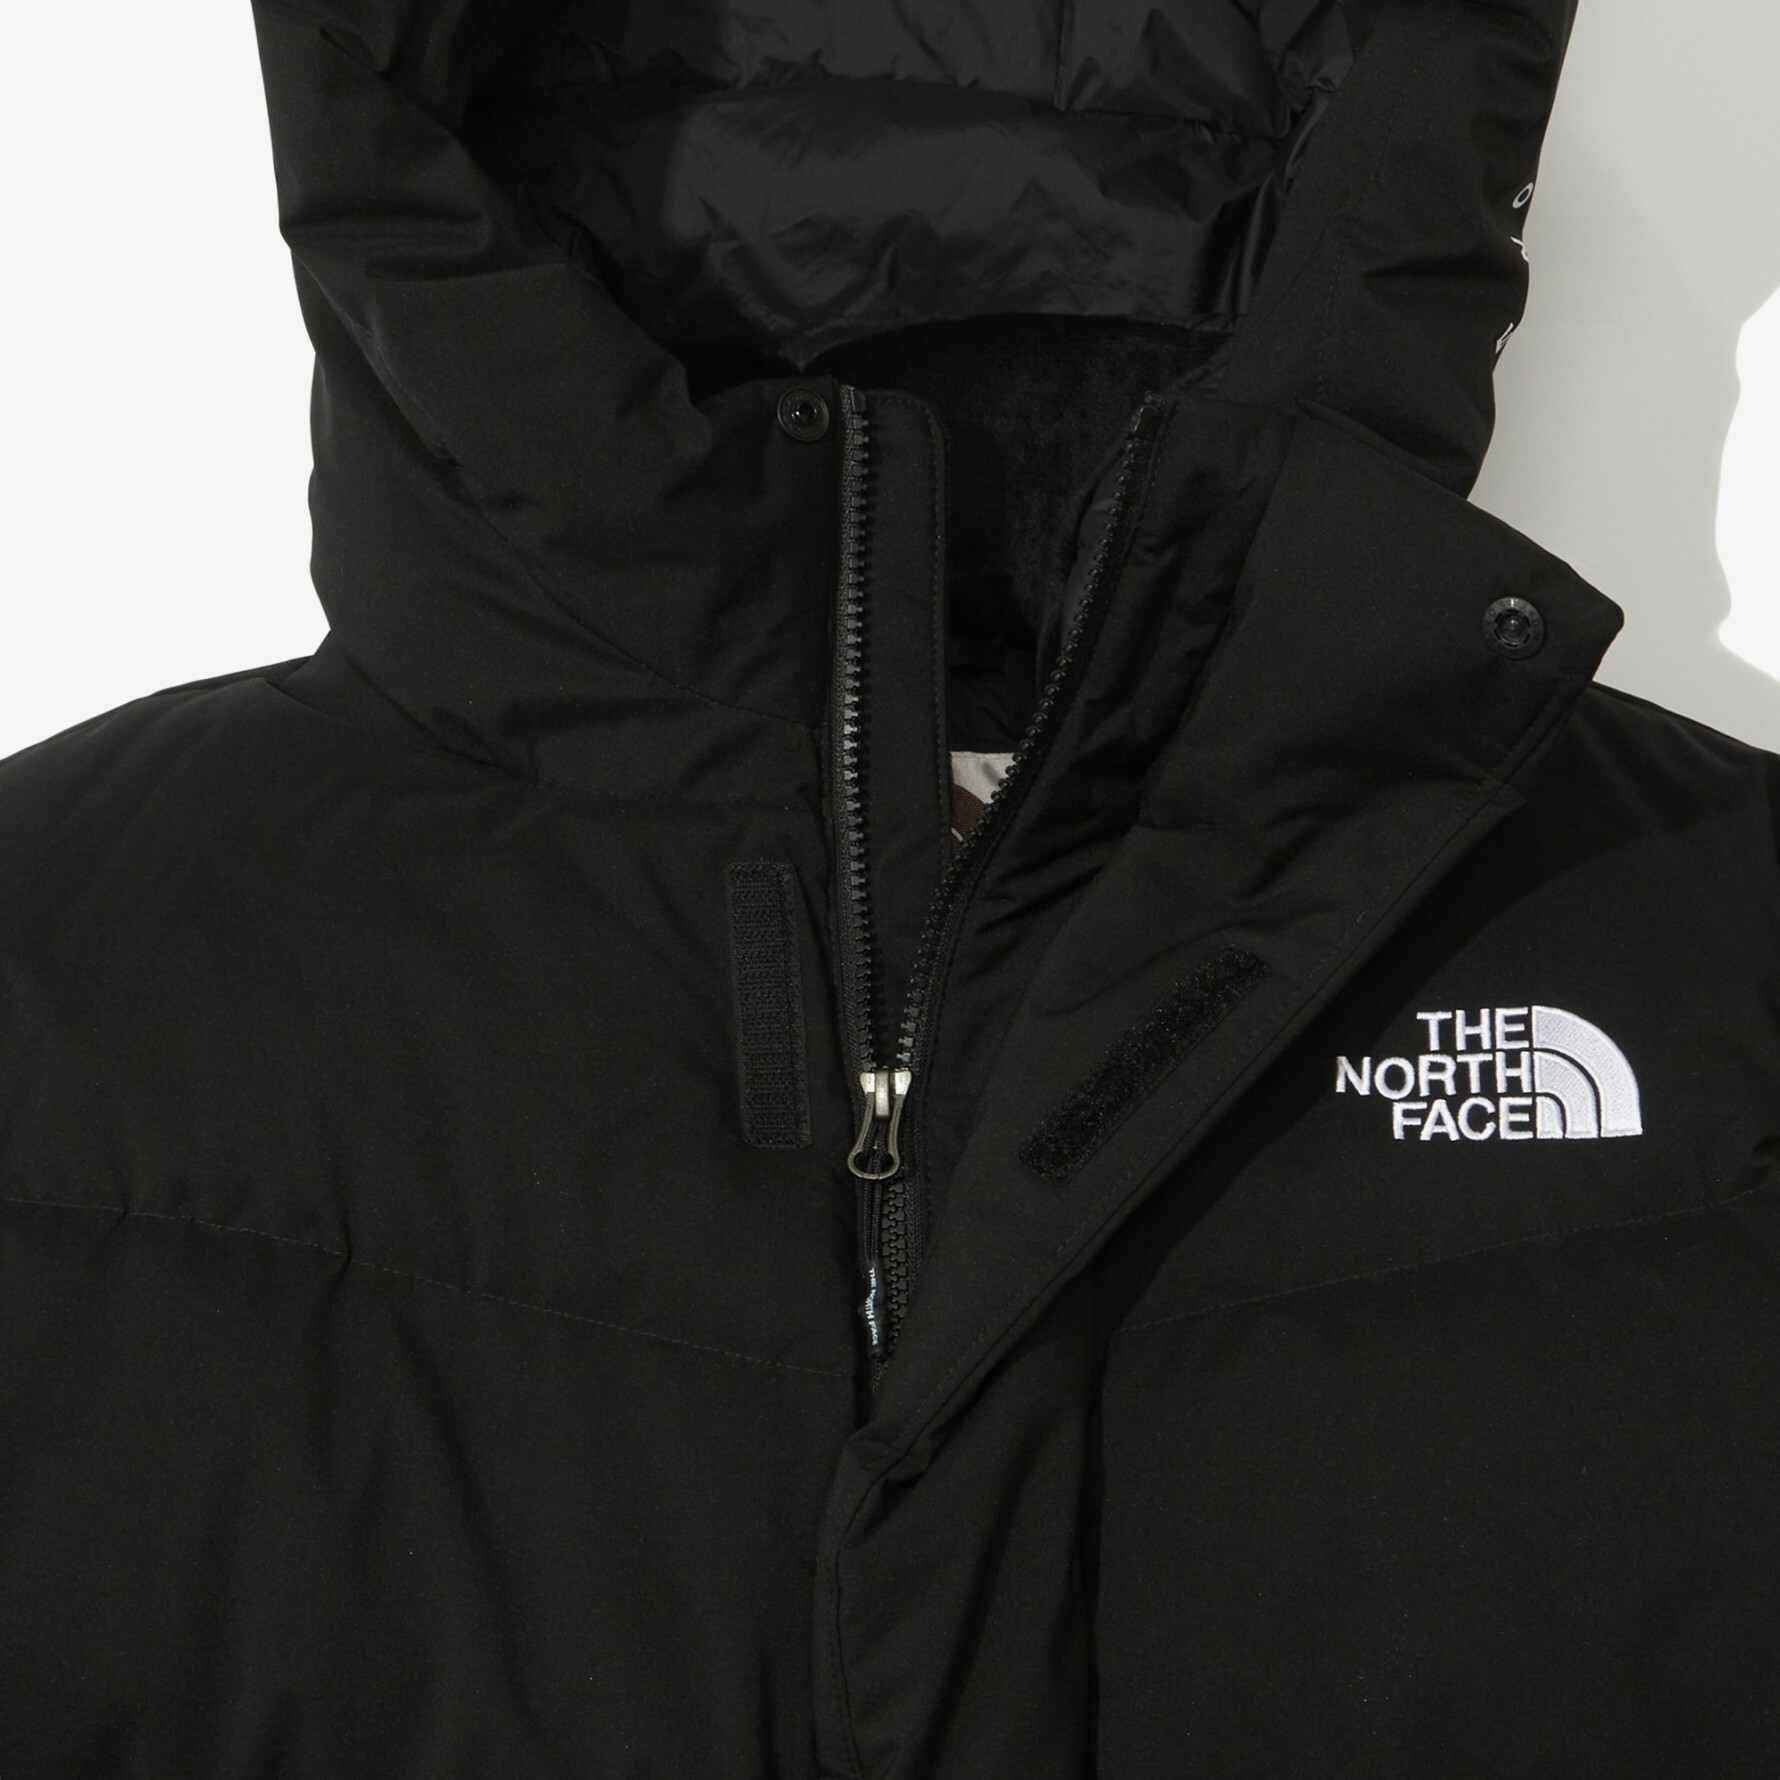 THE NORTH FACE FREE MOVE DOWN JACKET 羽絨外套黑色